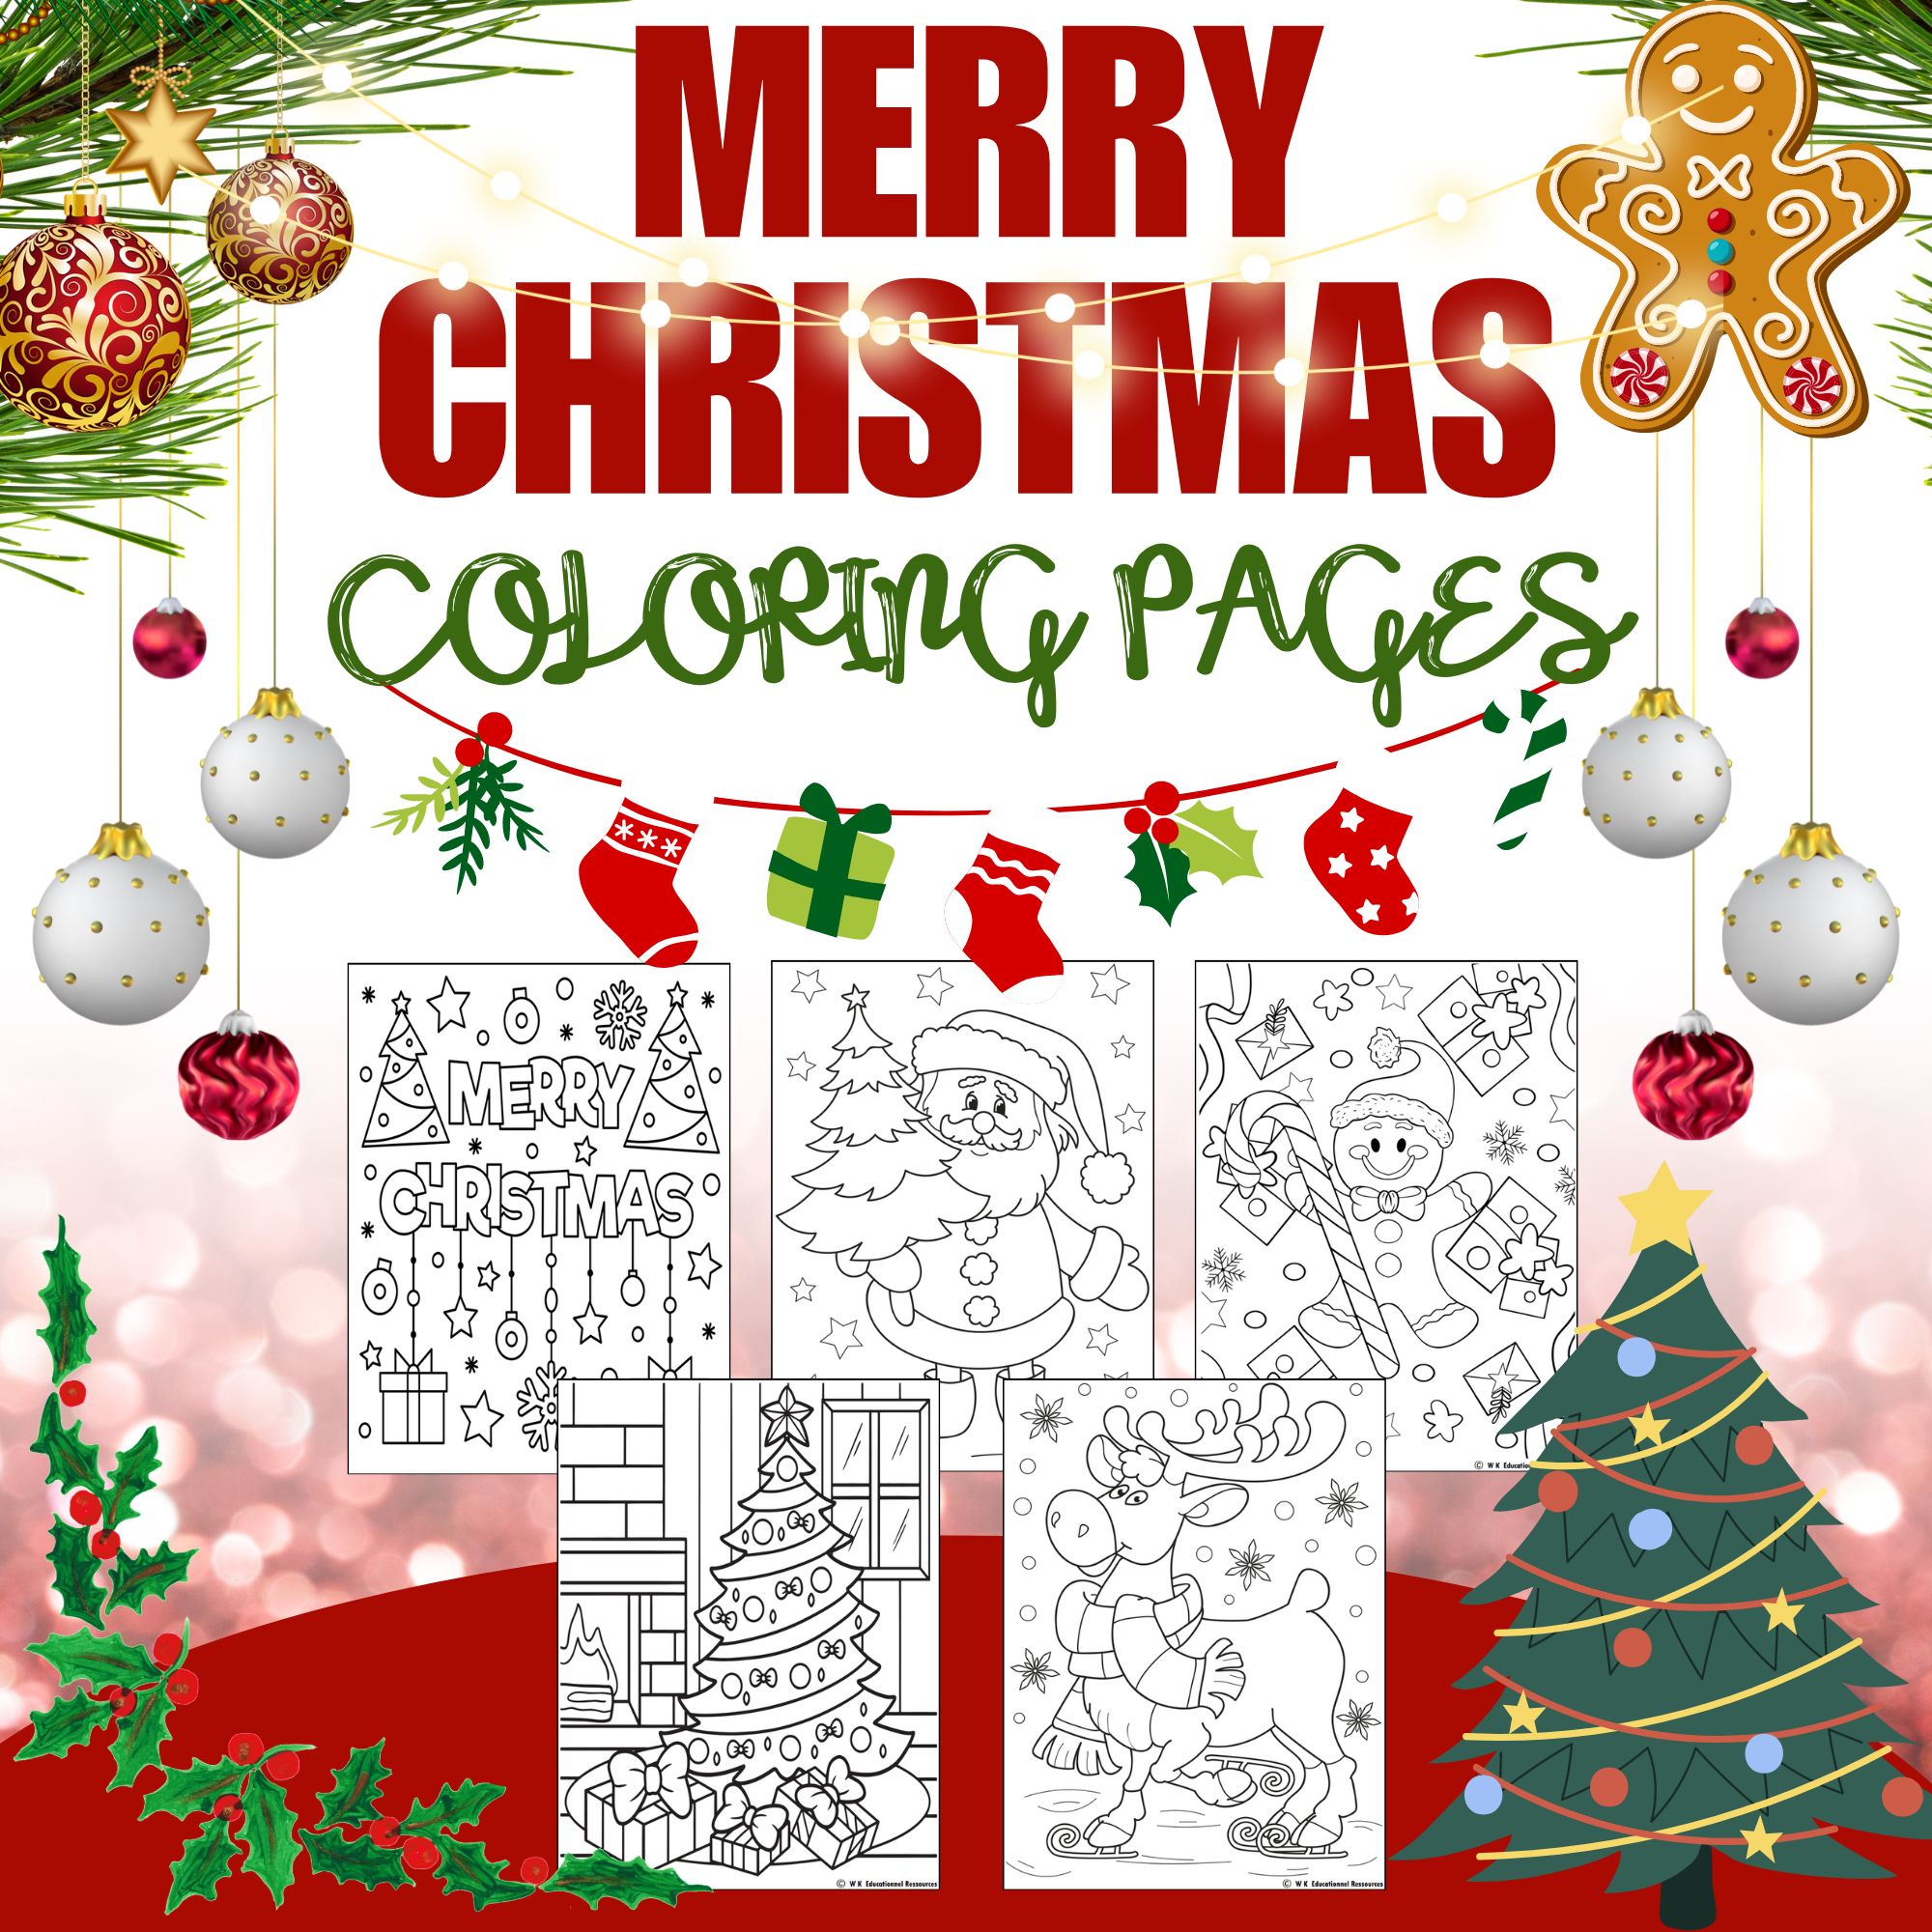 Merry christmas game maze crossword word search sudoku i spay winter made by teachers